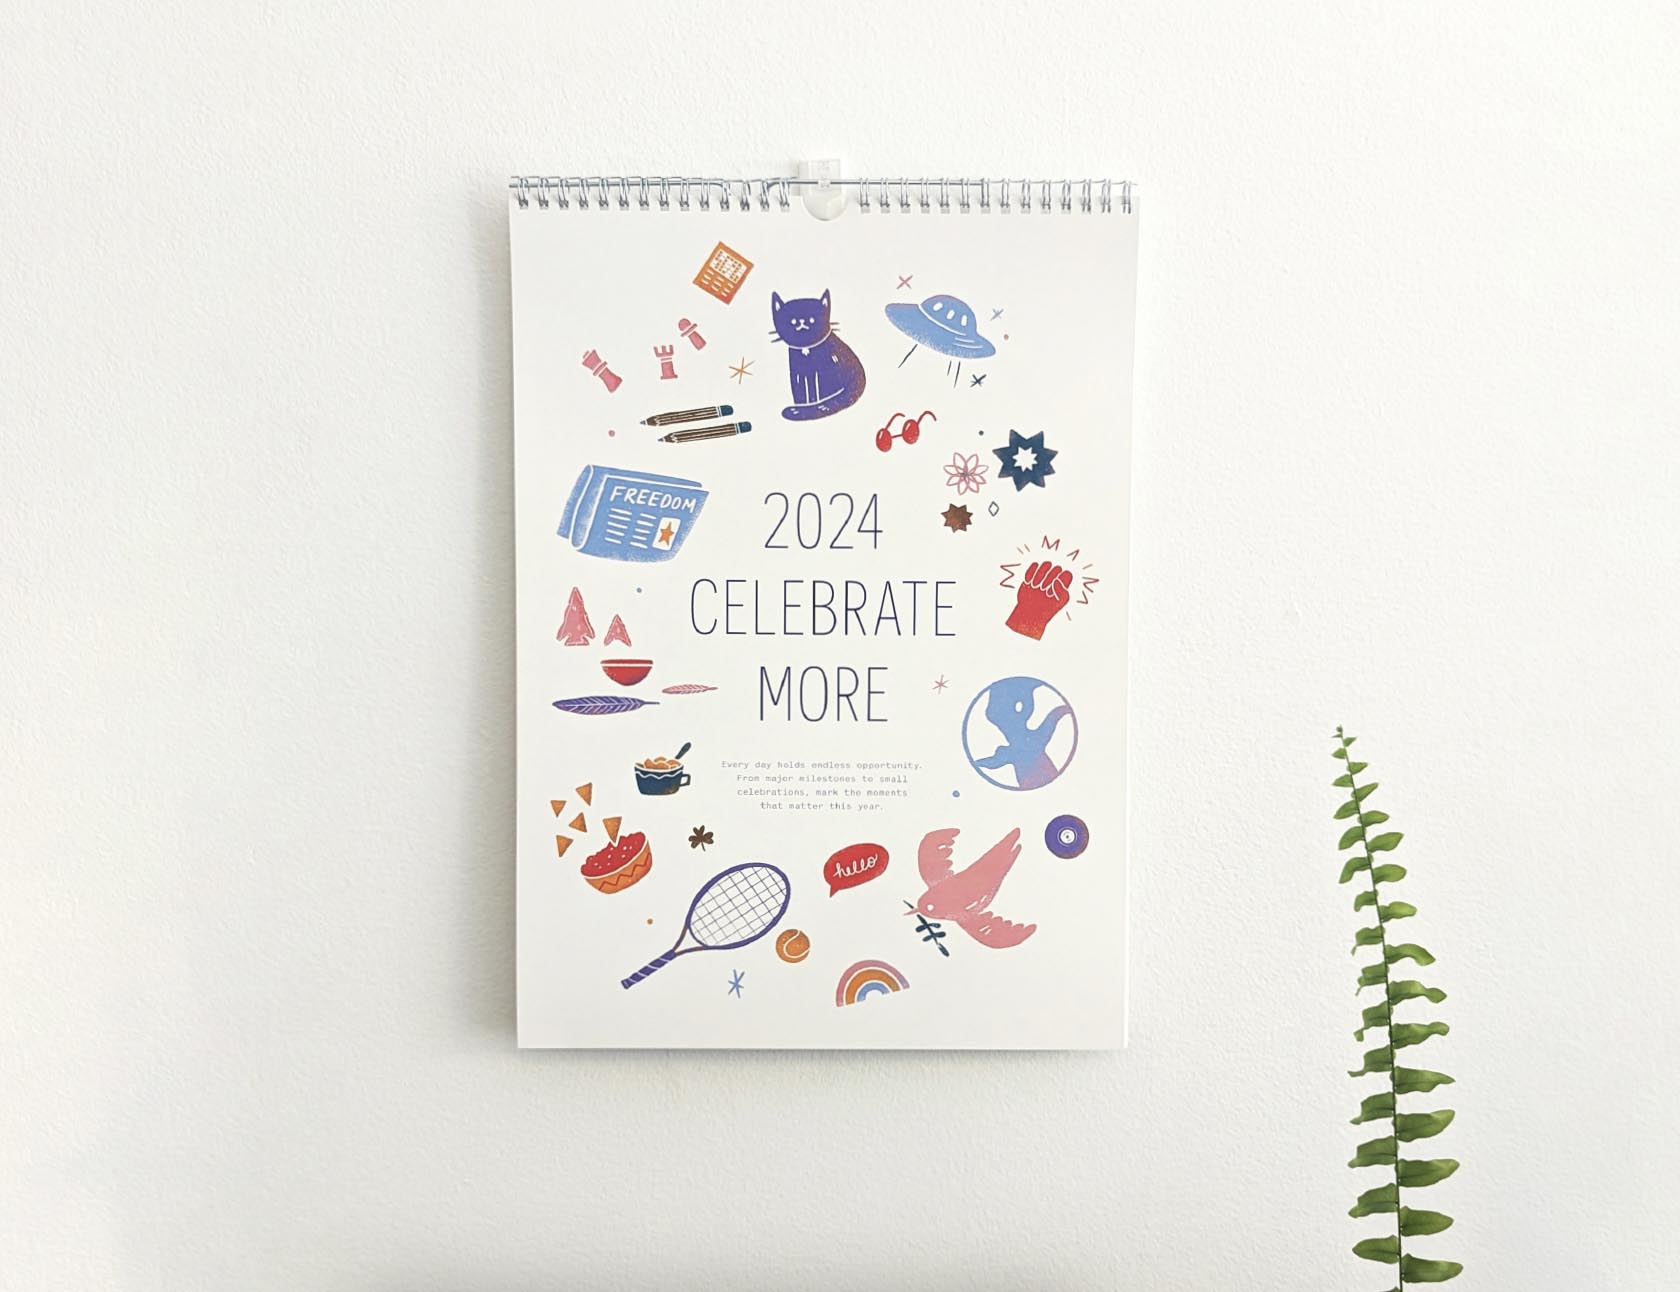 A photo of Redhead's holiday calendar cover which includes colorful illustrations and reads "2024 Celebrate More"